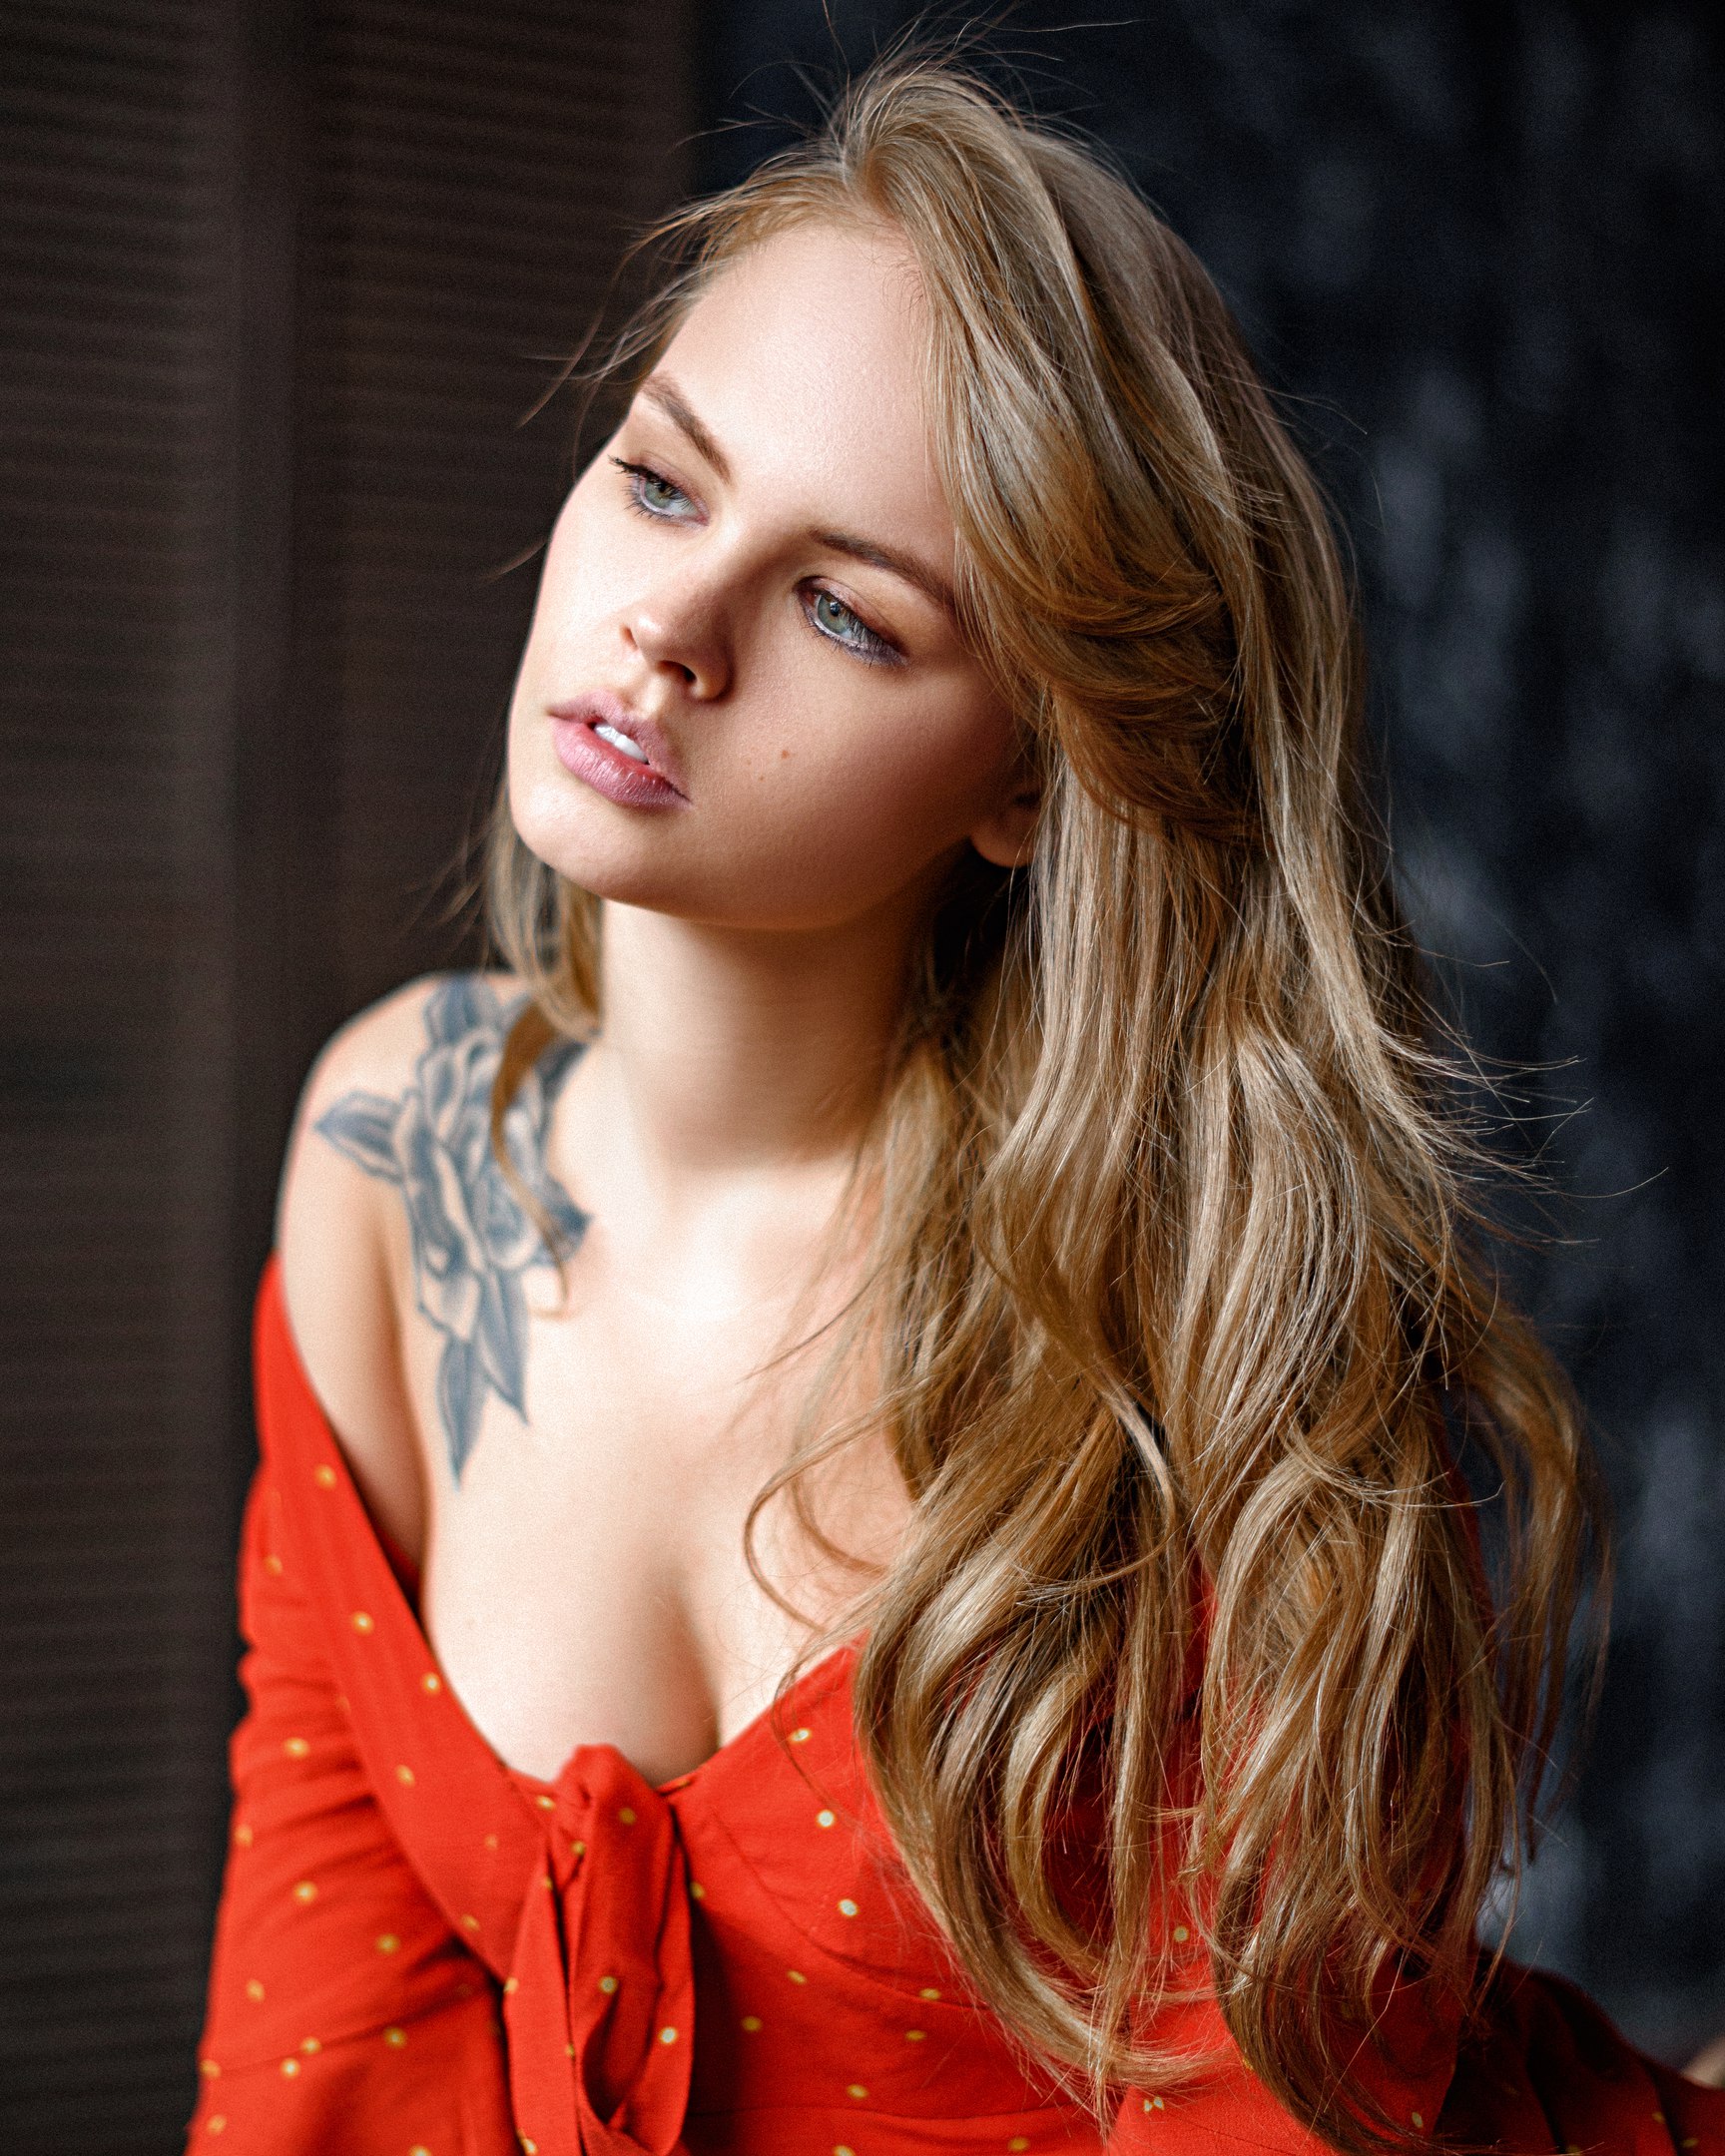 Max Pyzhik Women Model Blonde Portrait Indoors Depth Of Field Looking Into The Distance Inked